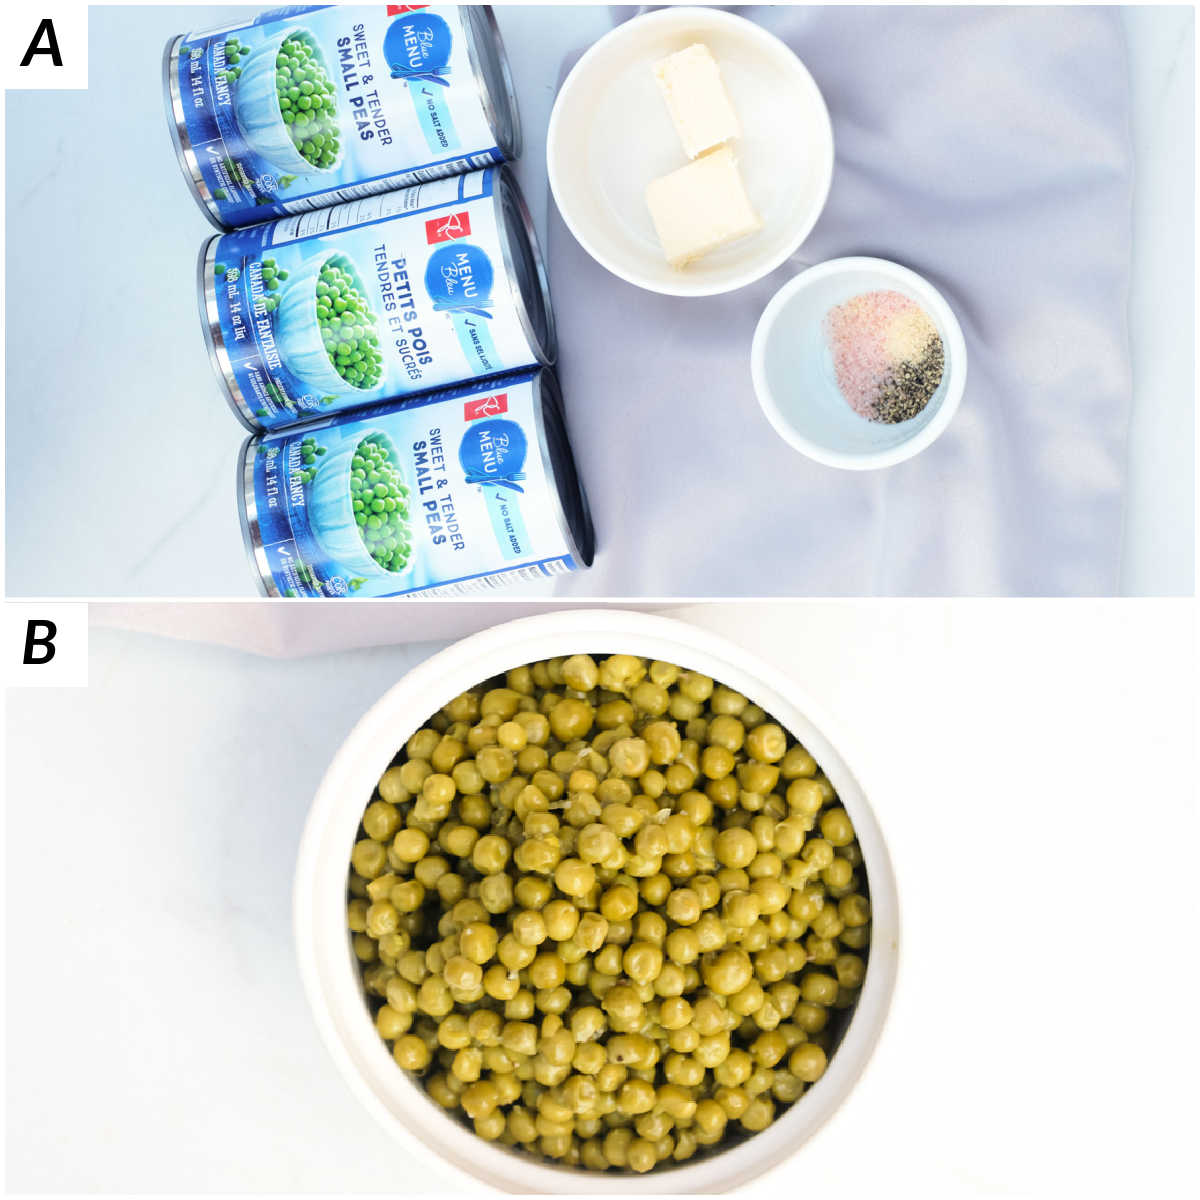 image collage showing the steps for how to cook canned peas in microwave